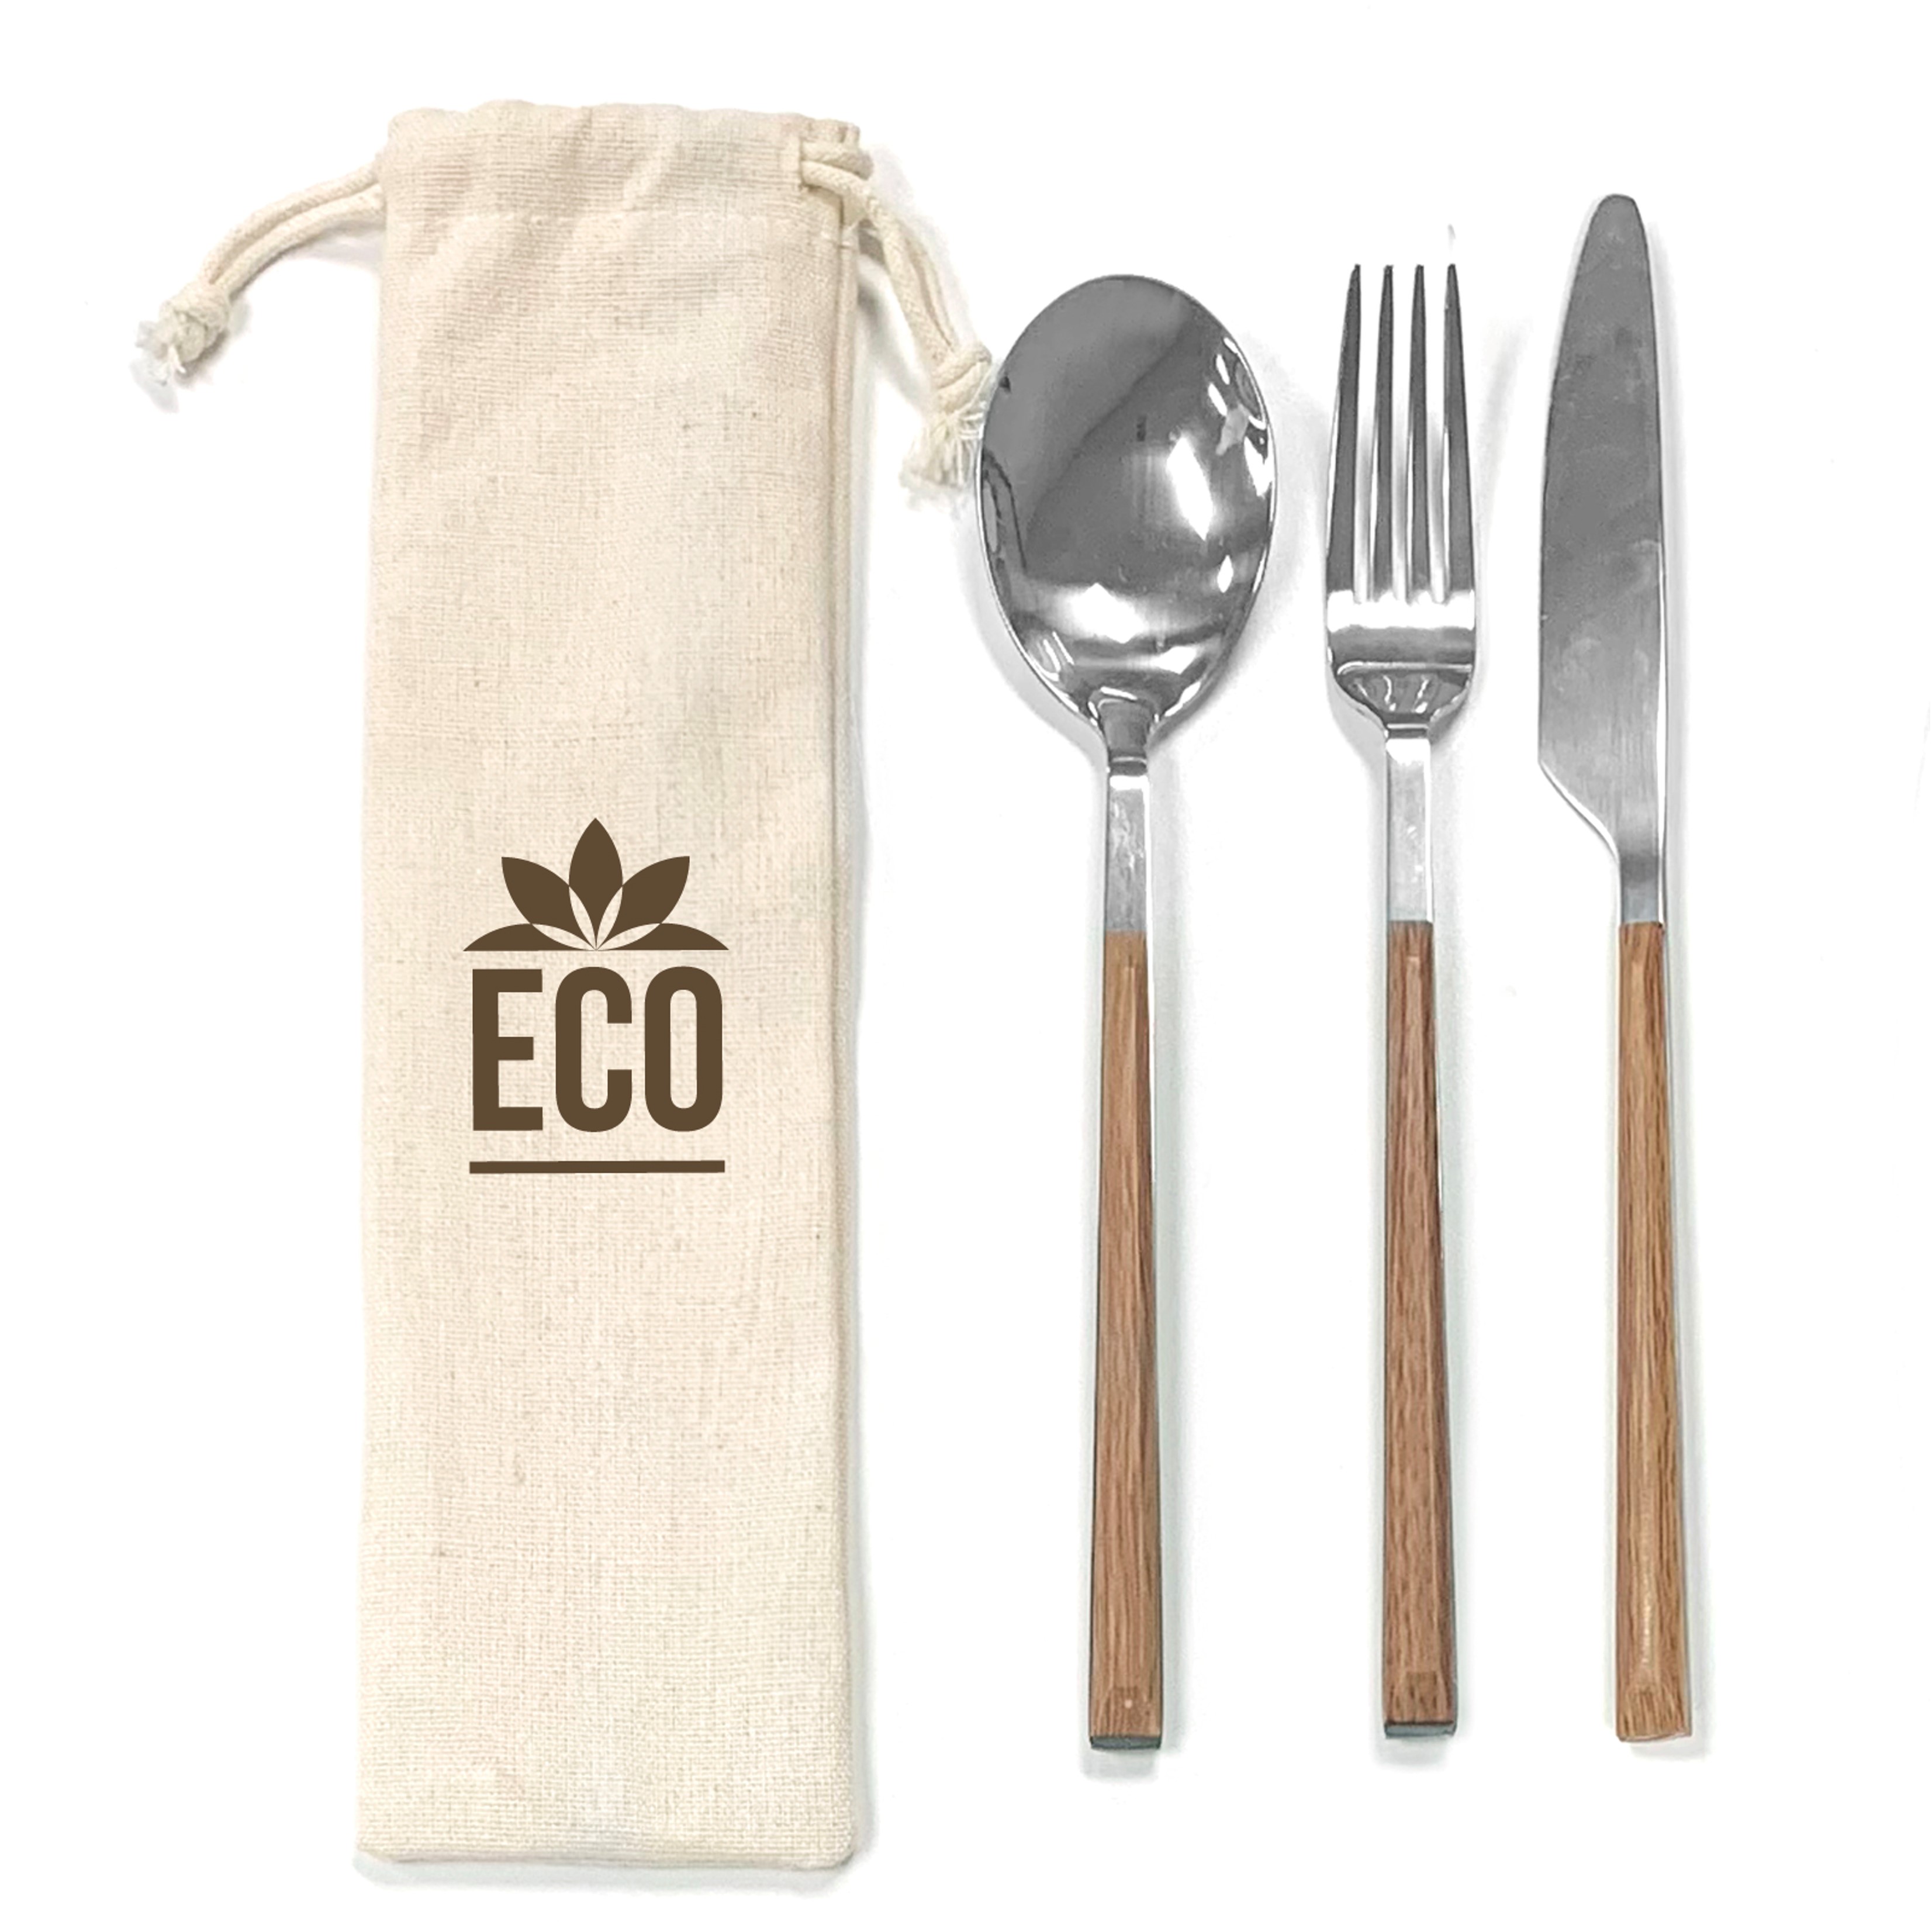 Stainless Utensil Set In Reusable Cotton Pouch